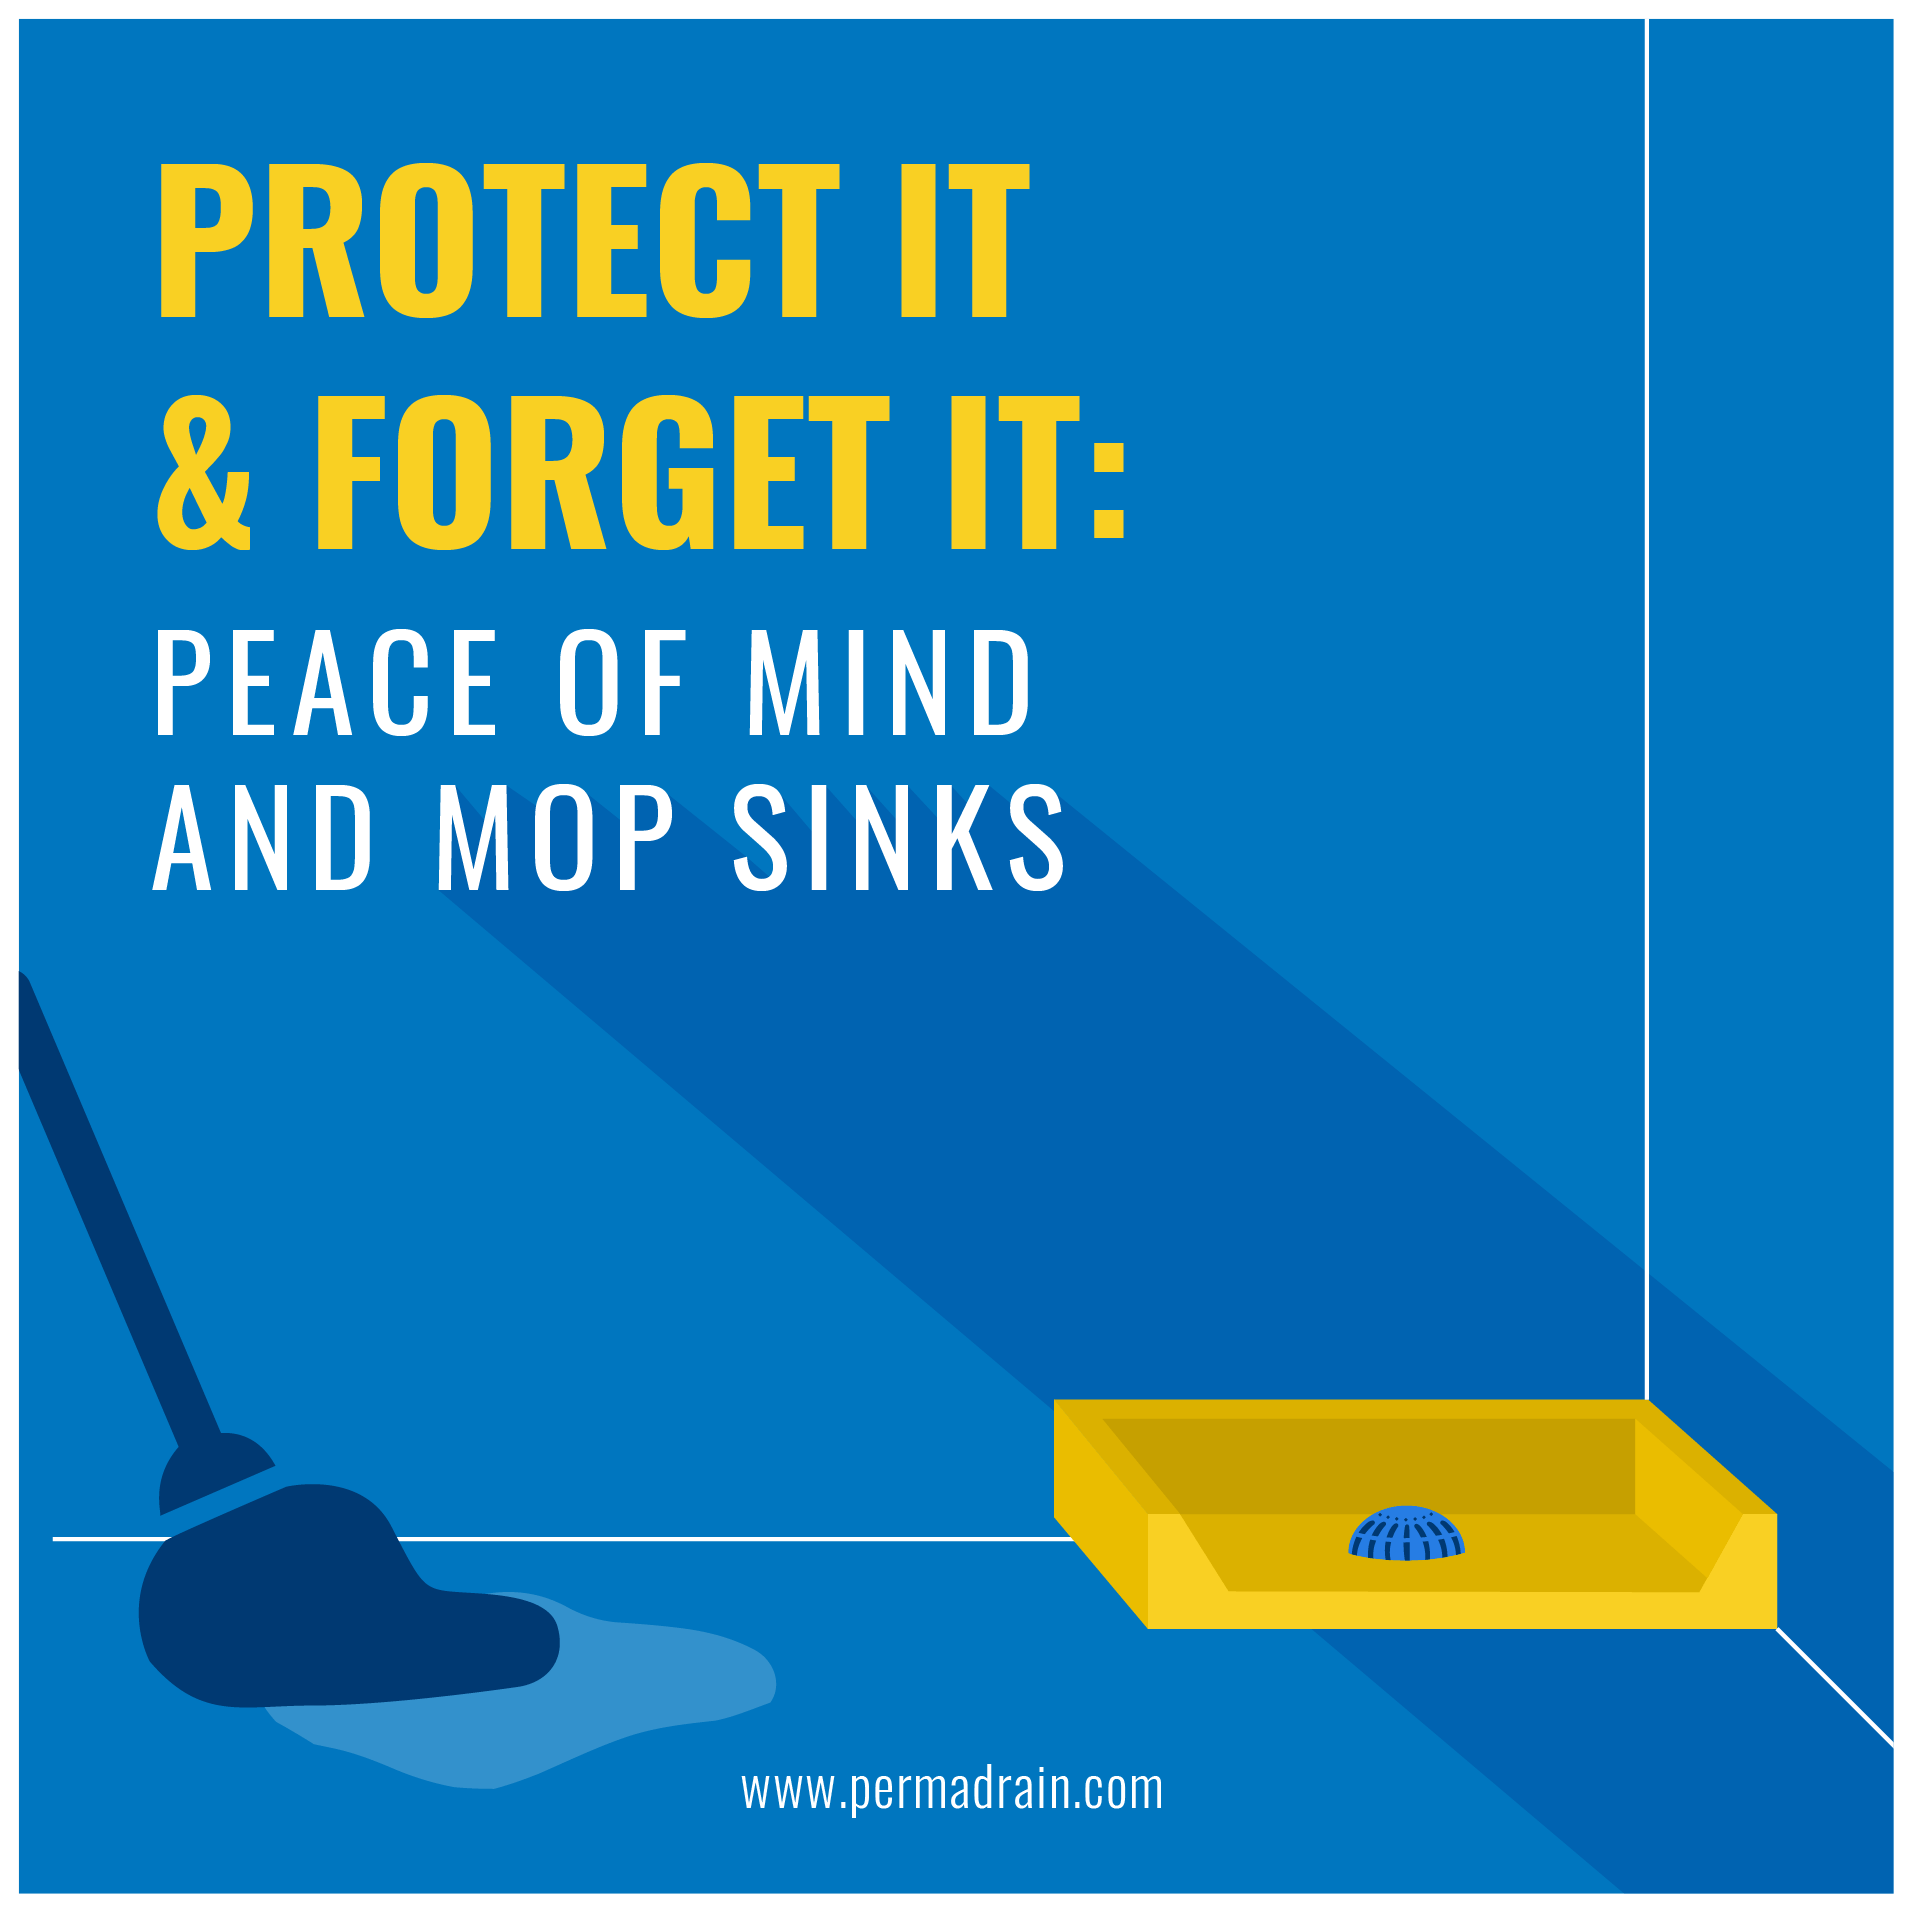 Protect it and forget it: Peace of mind and mop sinks